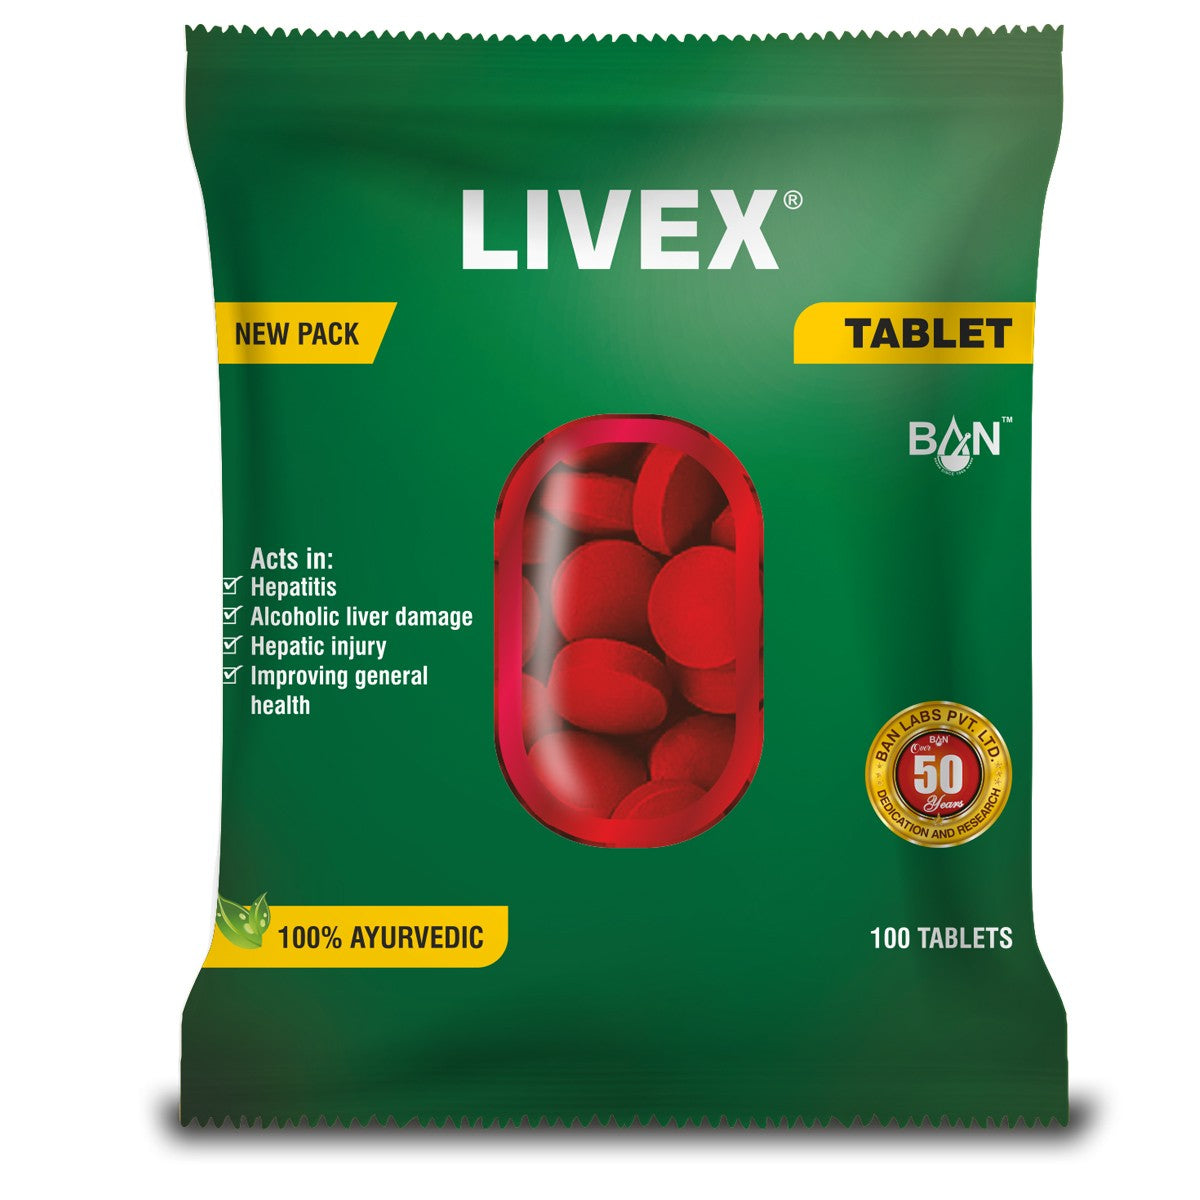 Shop Livex Tablet - 100Tablets at price 91.66 from Banlabs Online - Ayush Care